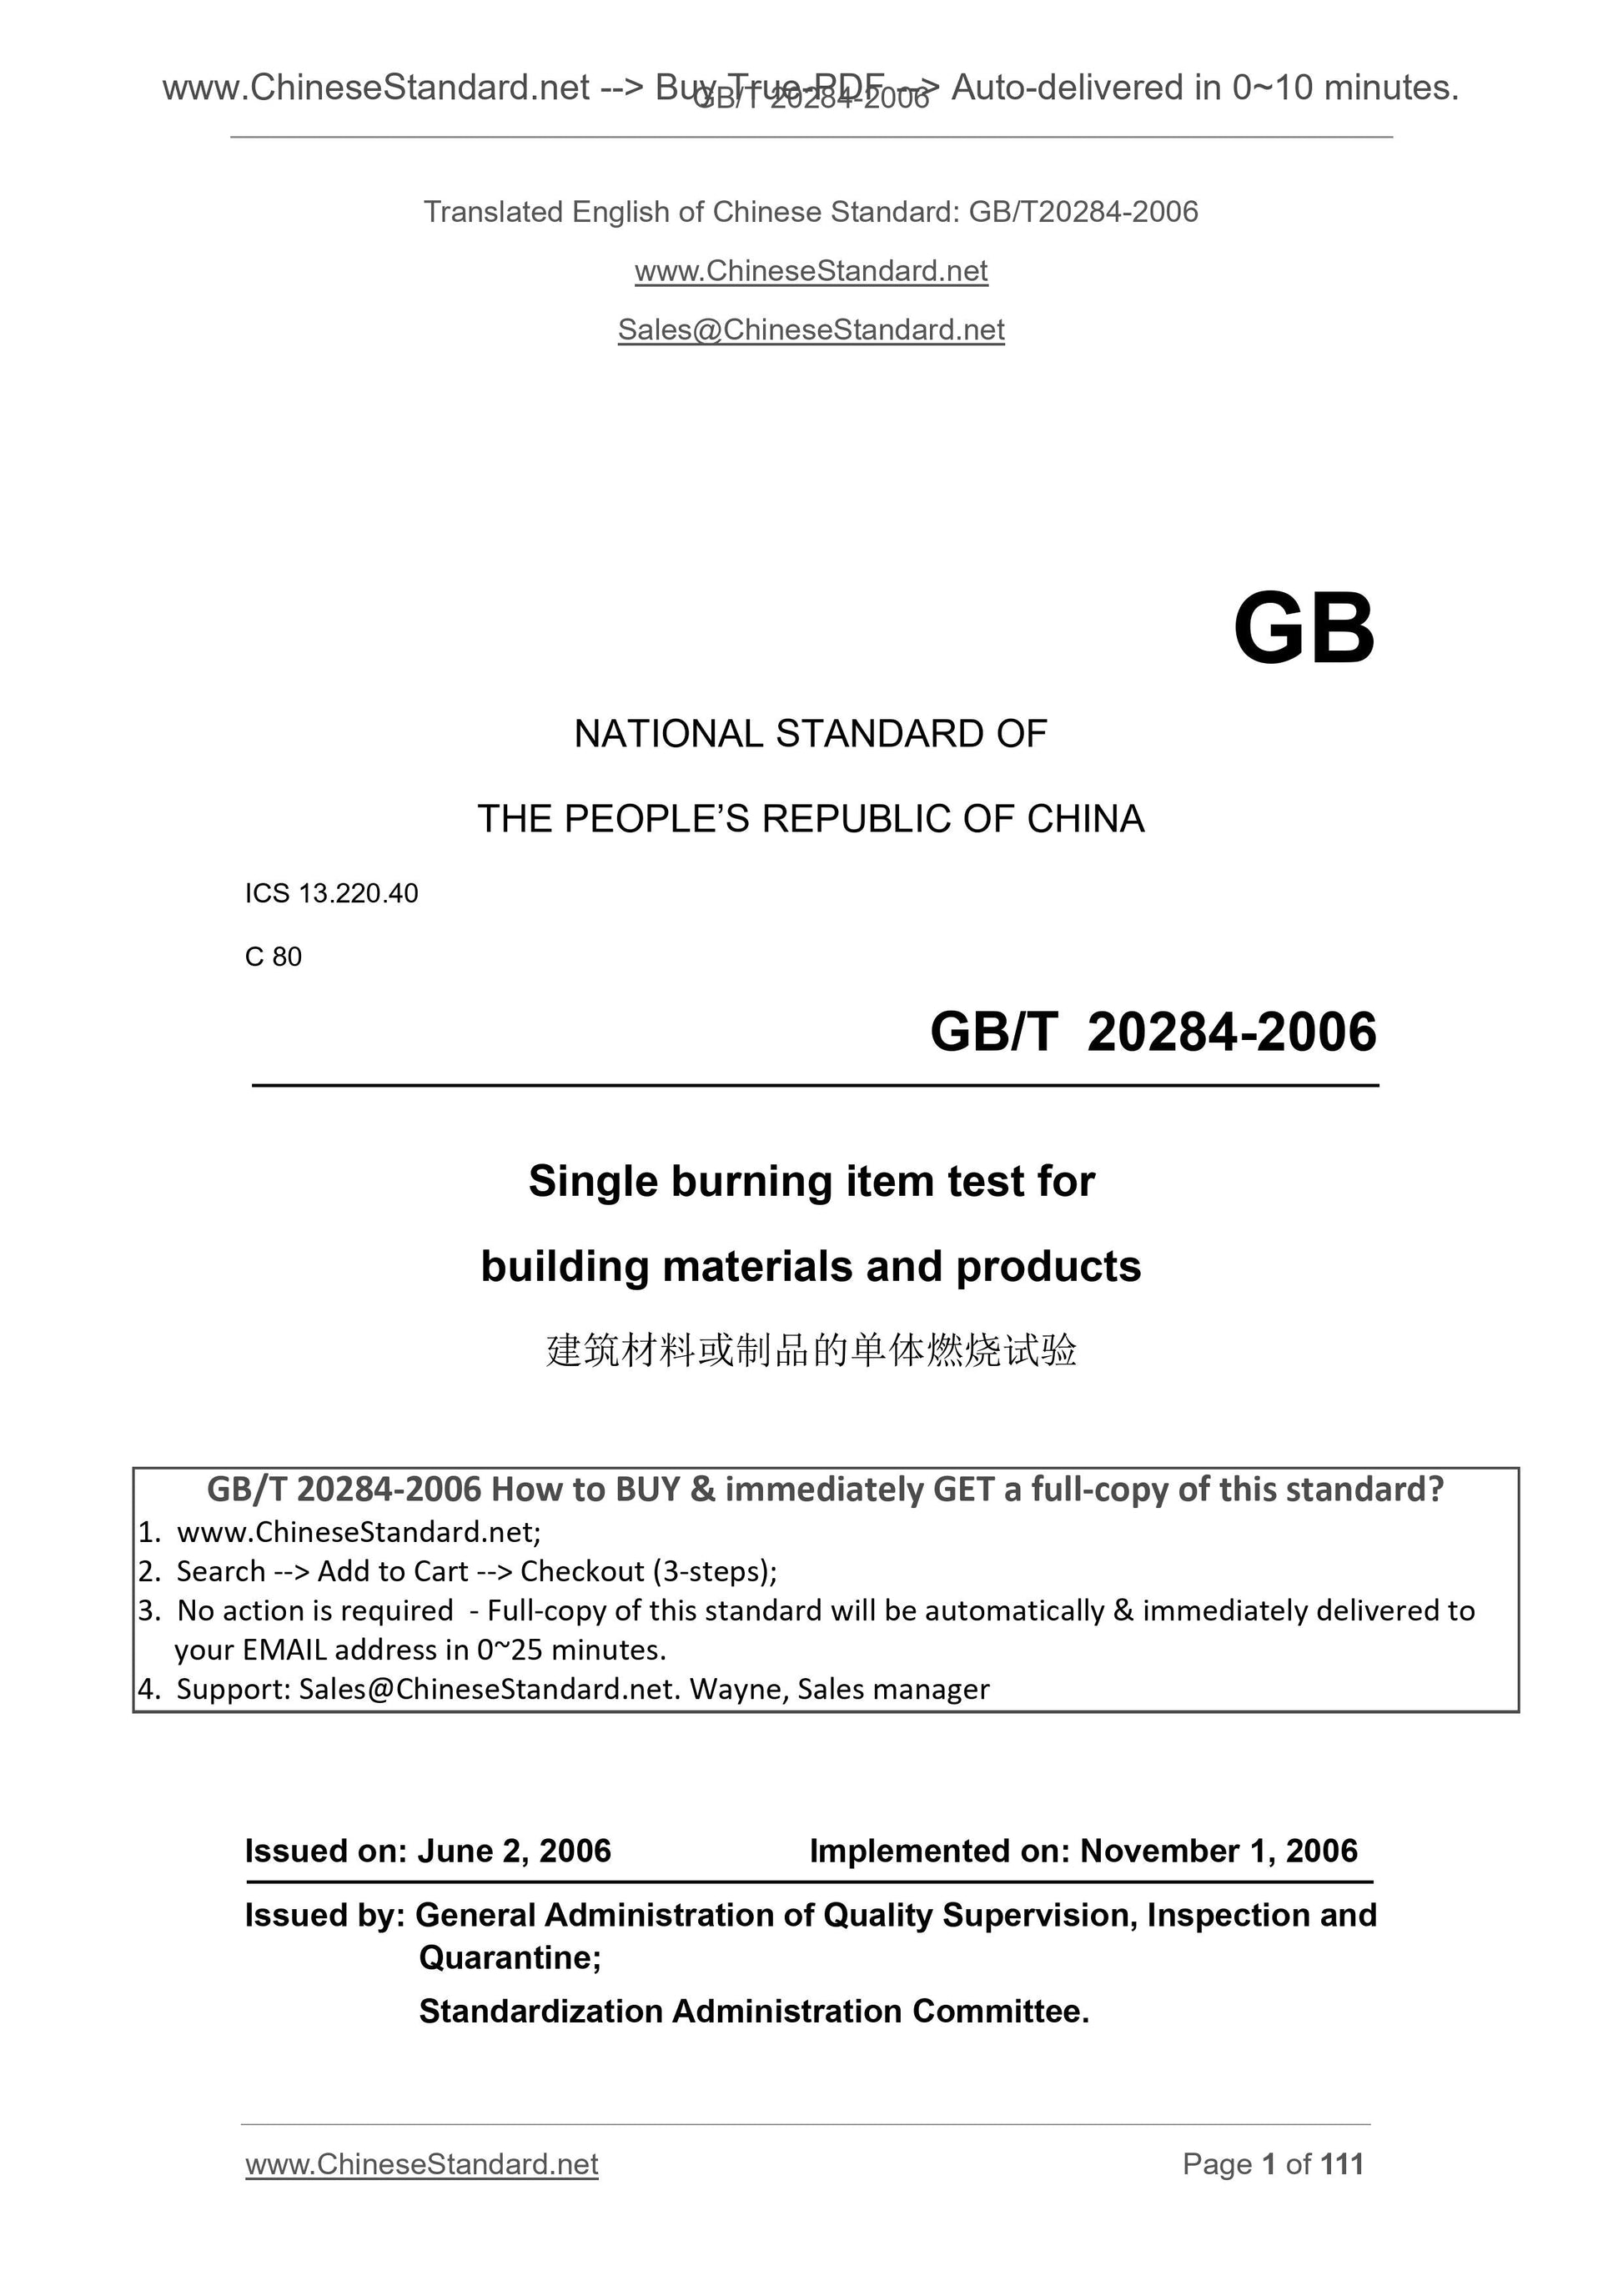 GB/T 20284-2006 Page 1